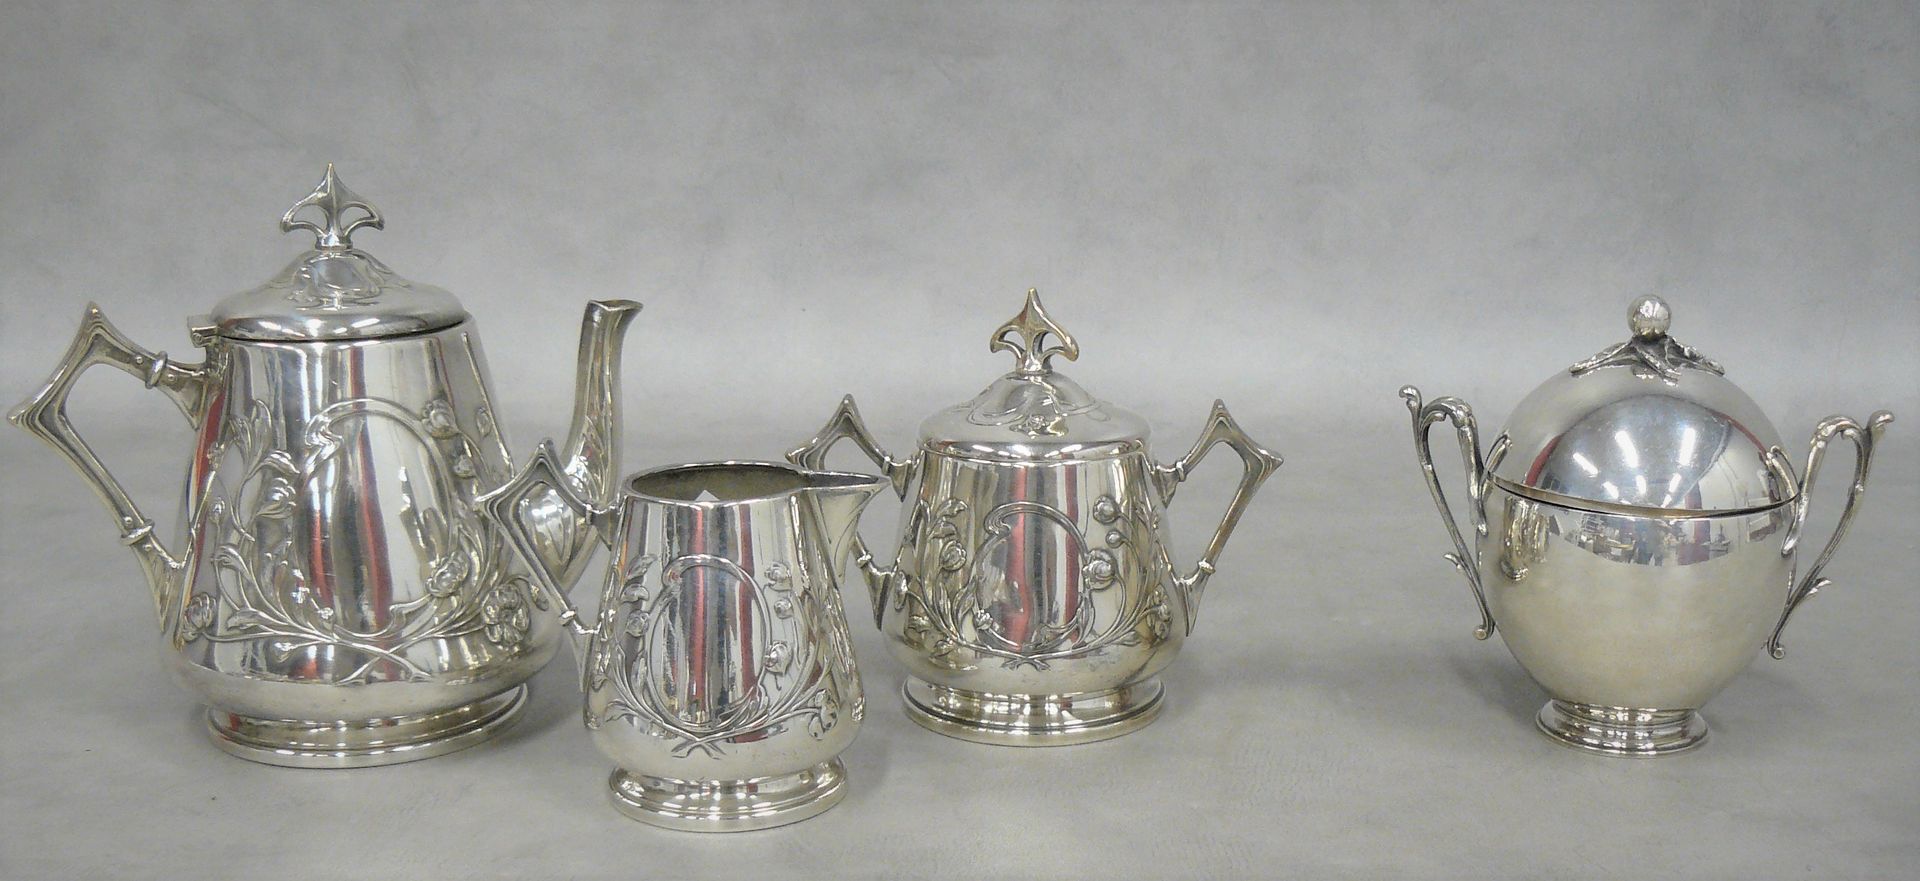 CHRISTOFLE an Art Nouveau three-piece metal service with W.M.F.G. Mark and a Chr&hellip;